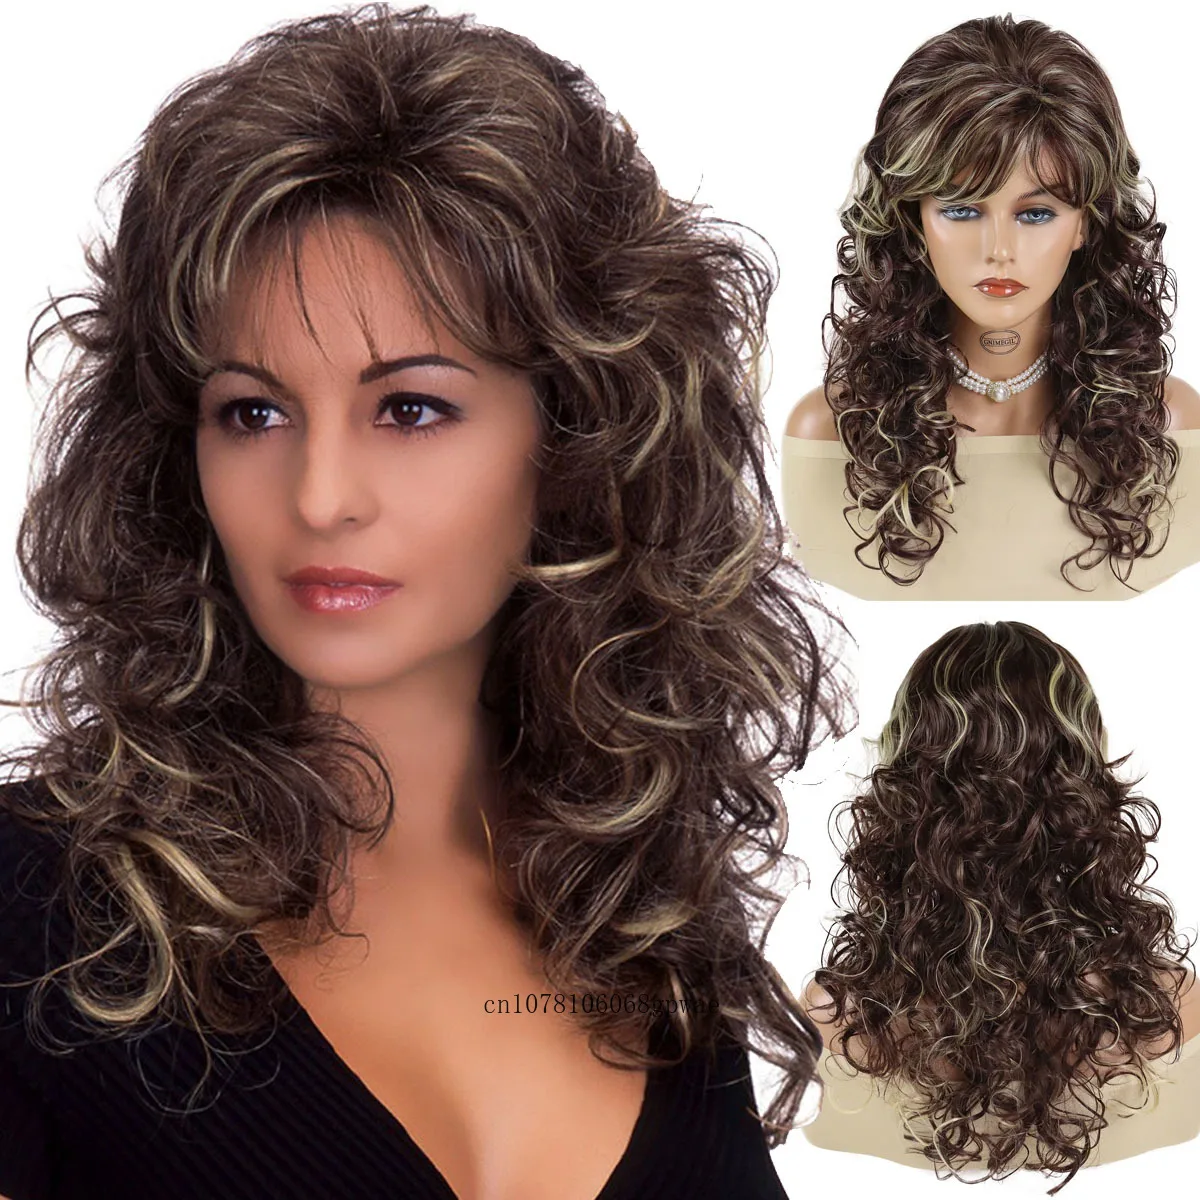 

Women's Long Curly Wig with Bangs Natural Fluffy Heat Resistant Brown Mix Blonde Highlight Wigs Charming Lady Mommy Wig Cosplay